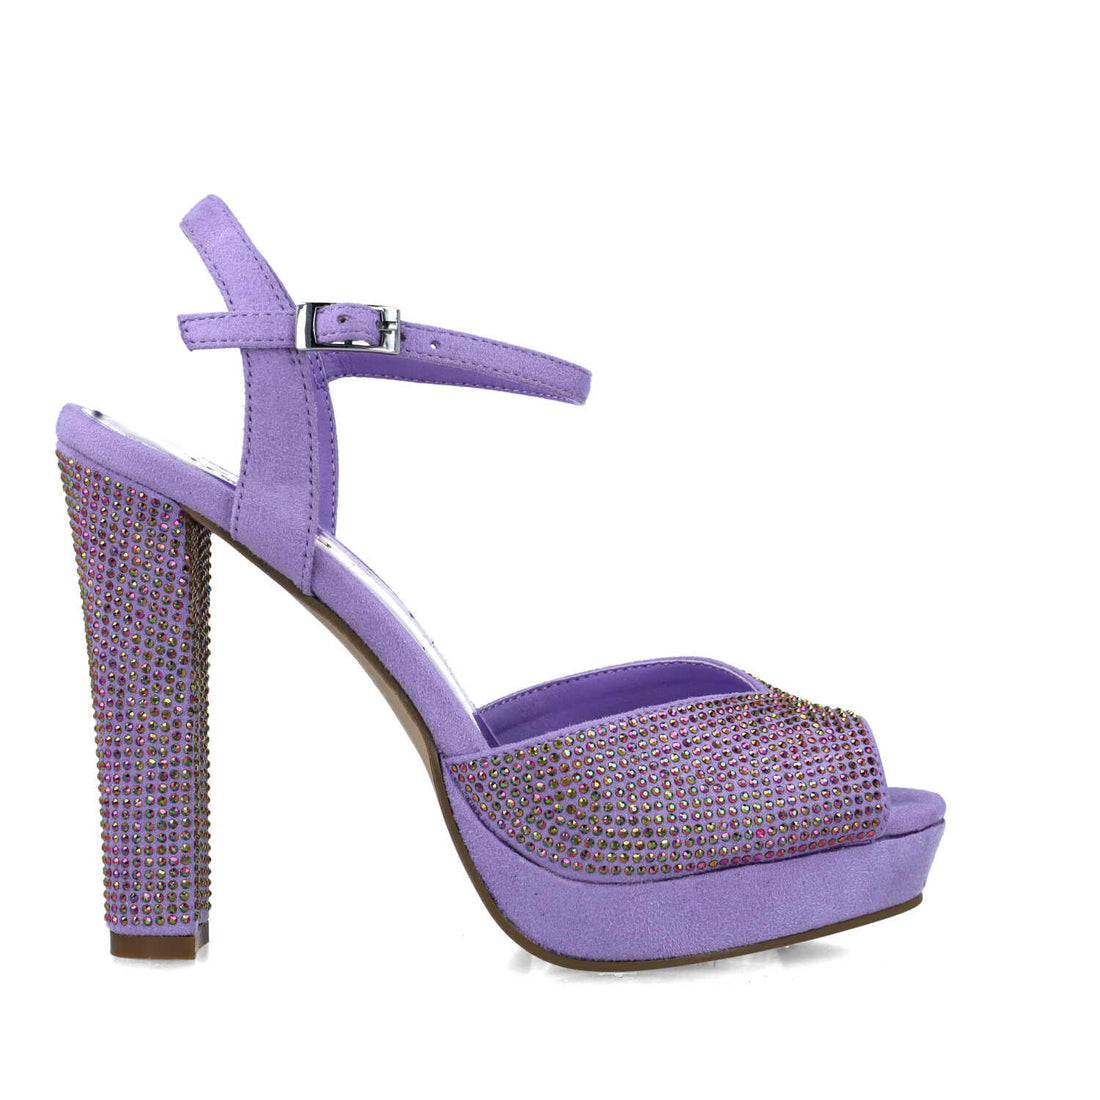 Purple High Heel Sandal With Ankle Strap_24791_80_01